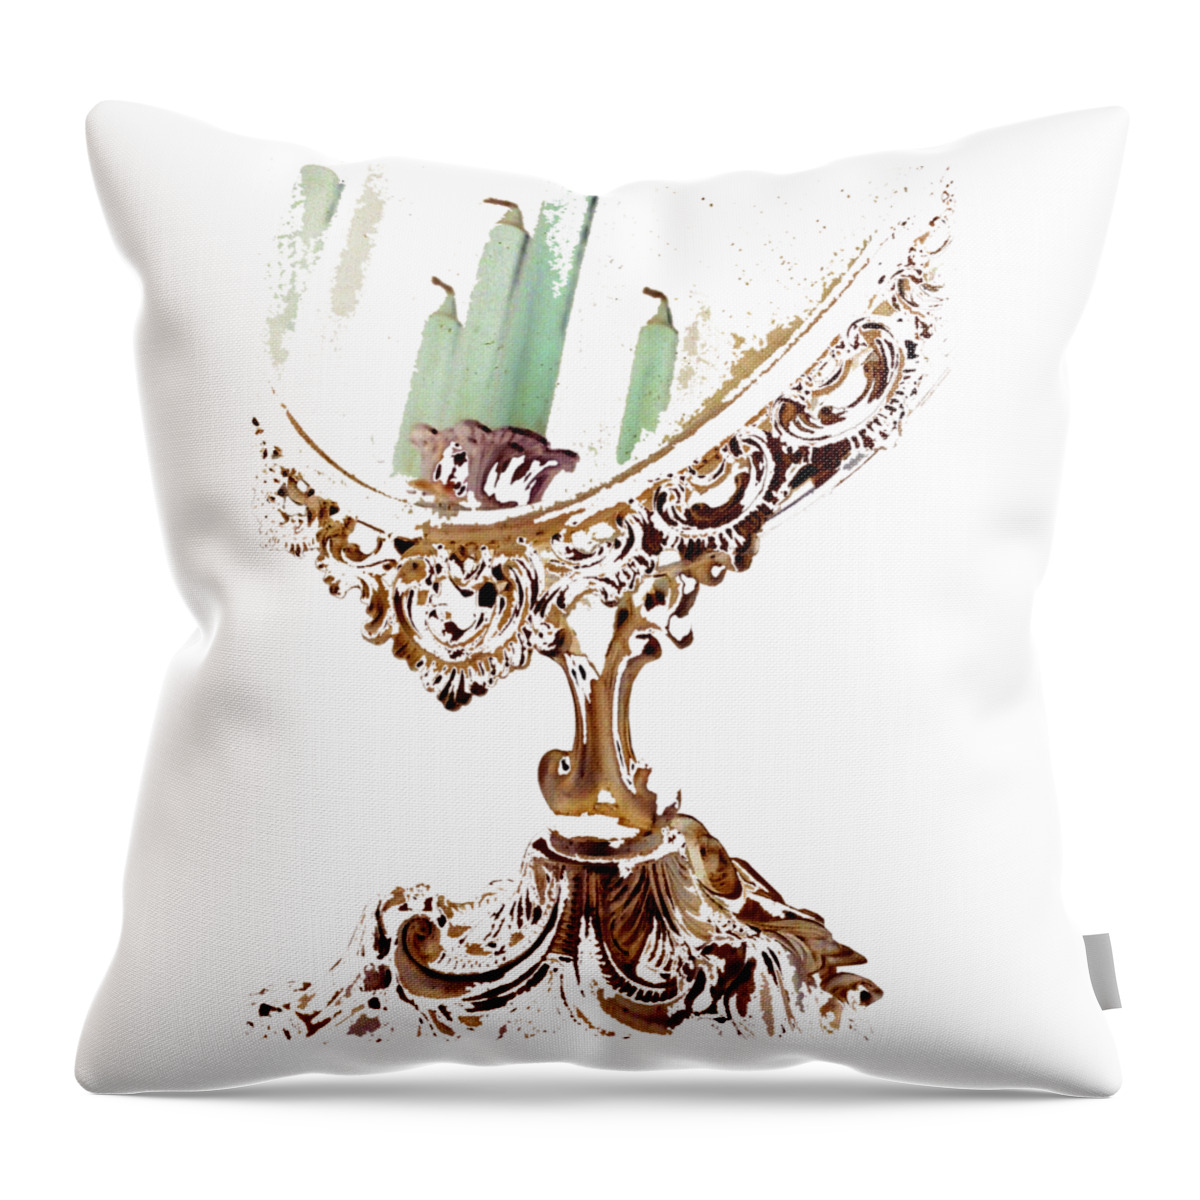 Orphelia Aristal Throw Pillow featuring the photograph Reflection by Orphelia Aristal